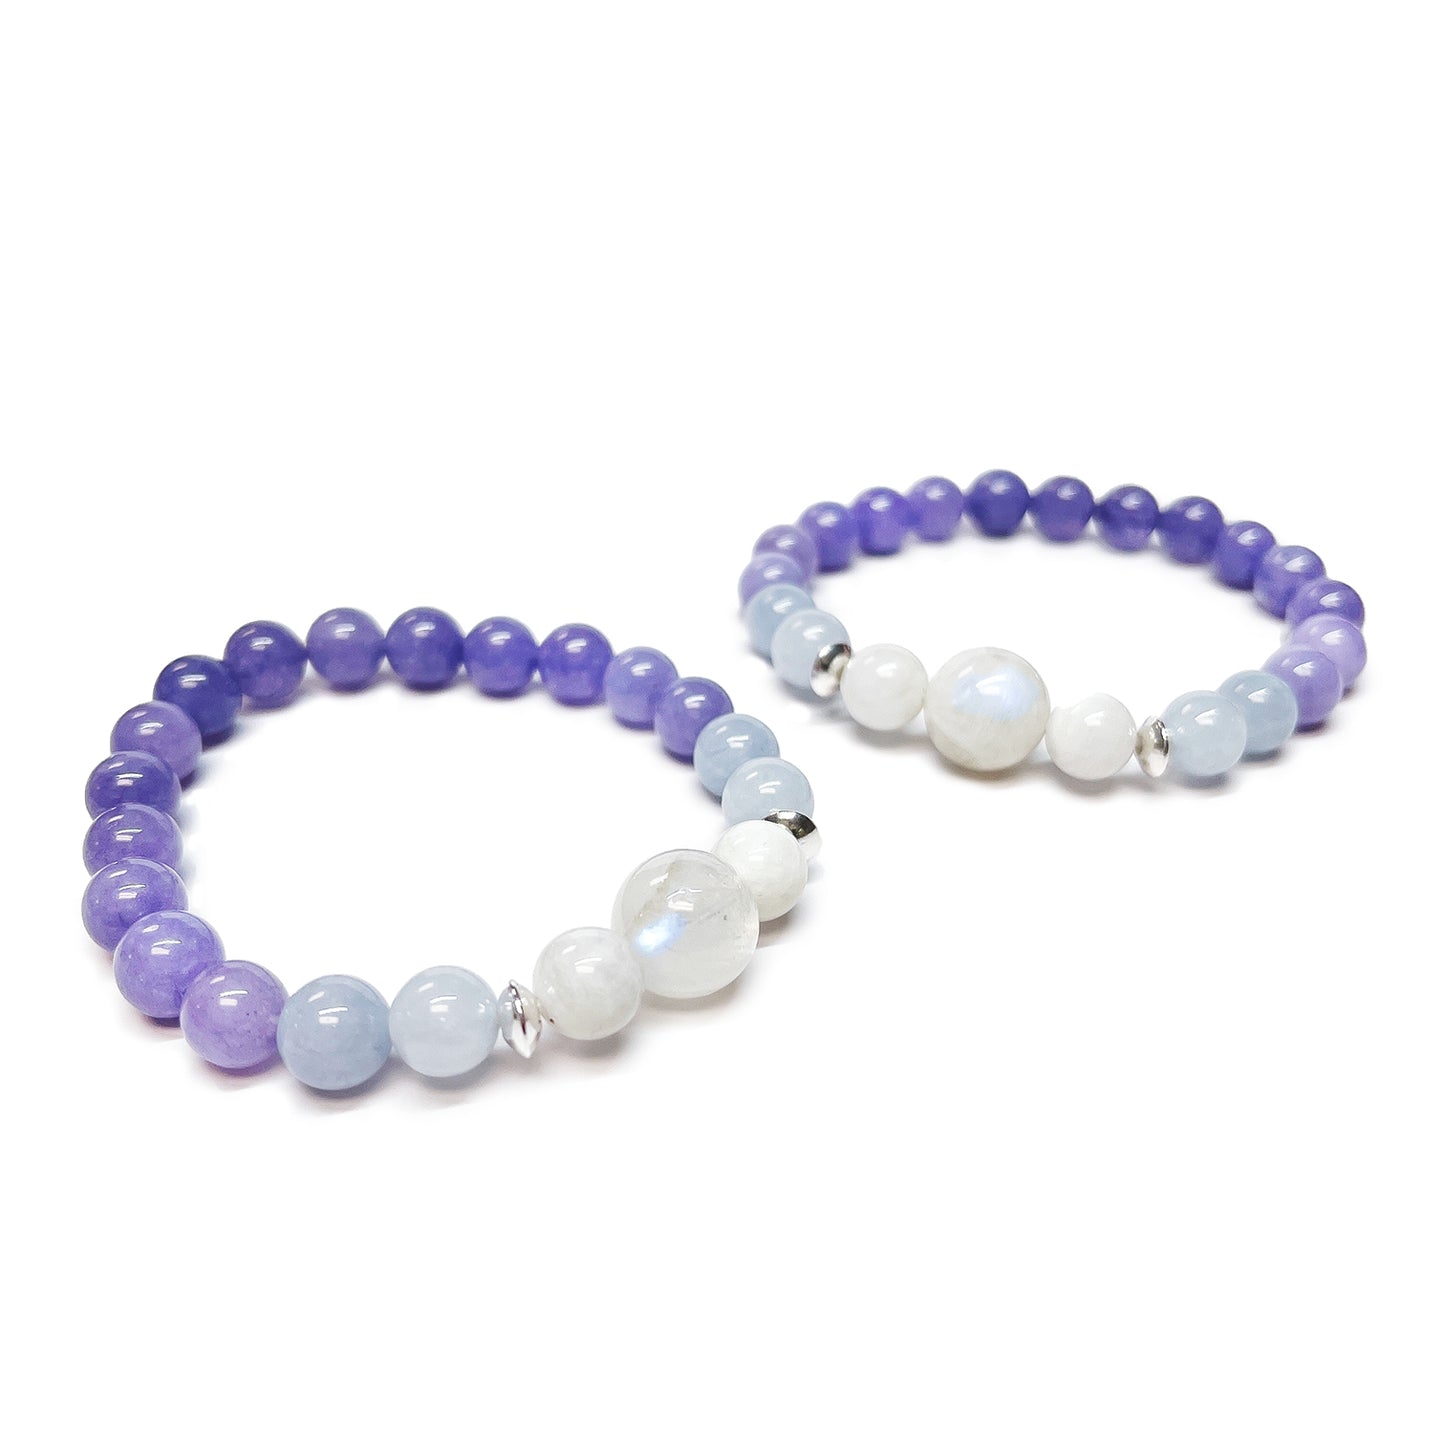 marian skincare holiday gift set includes the bracelet: a handmade crystal bead bracelet of Angelite, Aquamarine, and Moonstone crystals with stainless embellishments.